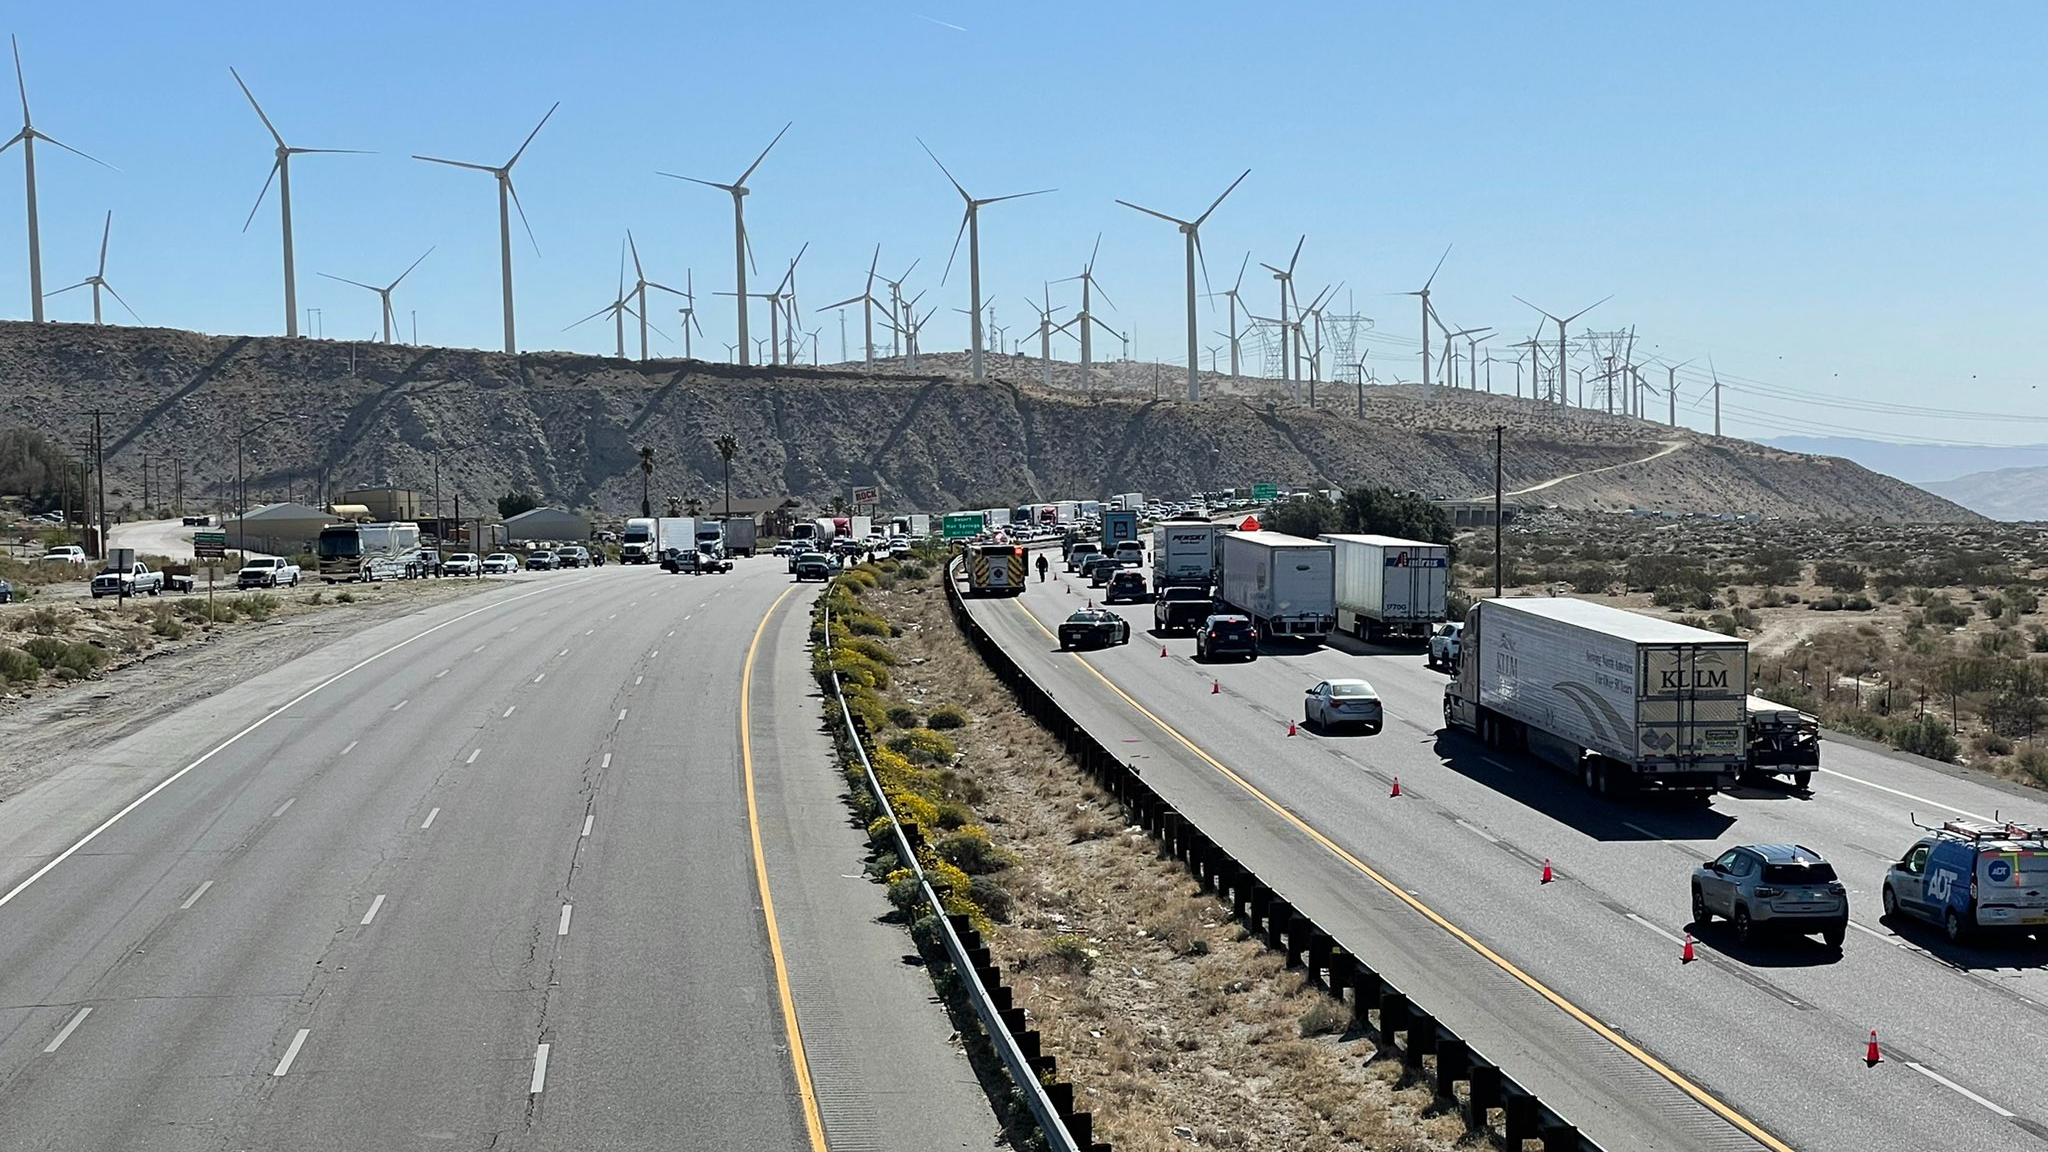 Traffic is backed up on the 10 Freeway after a deputy's shooting of a vandalism suspect shut down the westbound lanes on April 9, 2021, in an image released by the California Highway Patrol.